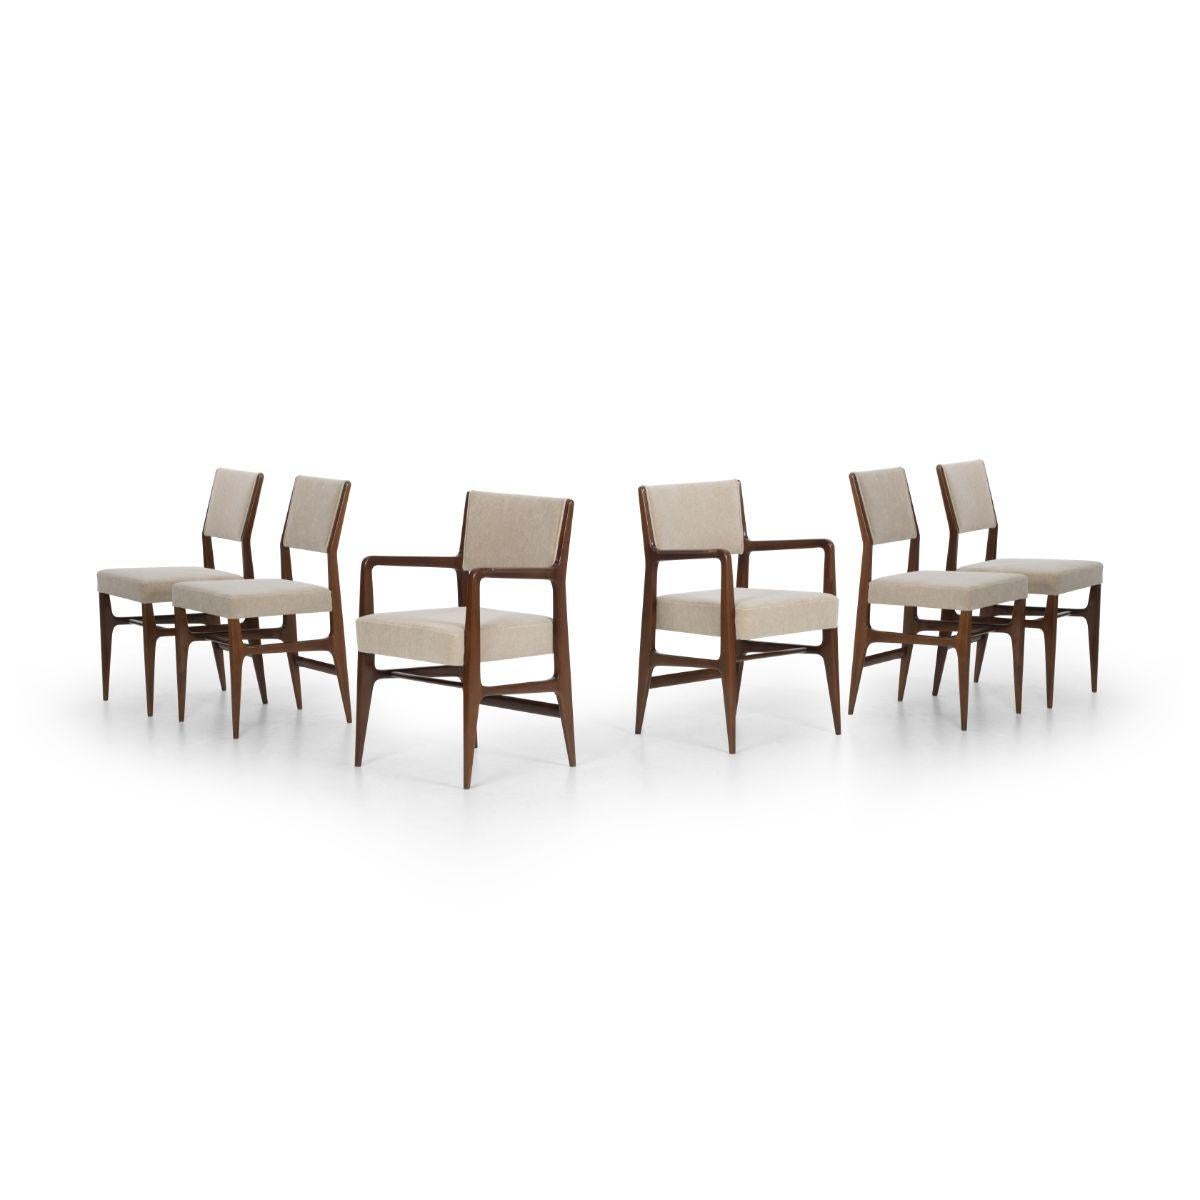 Gio Ponti dining chairs for Singer & Sons Set of Six
Set includes two armchairs, model 149 and four side chairs, model 116
Refurbished walnut frames, newly upholstery in Great Plains mohair.
Arm chair dimensions: 34 h × 22 w × 22 d in
Side